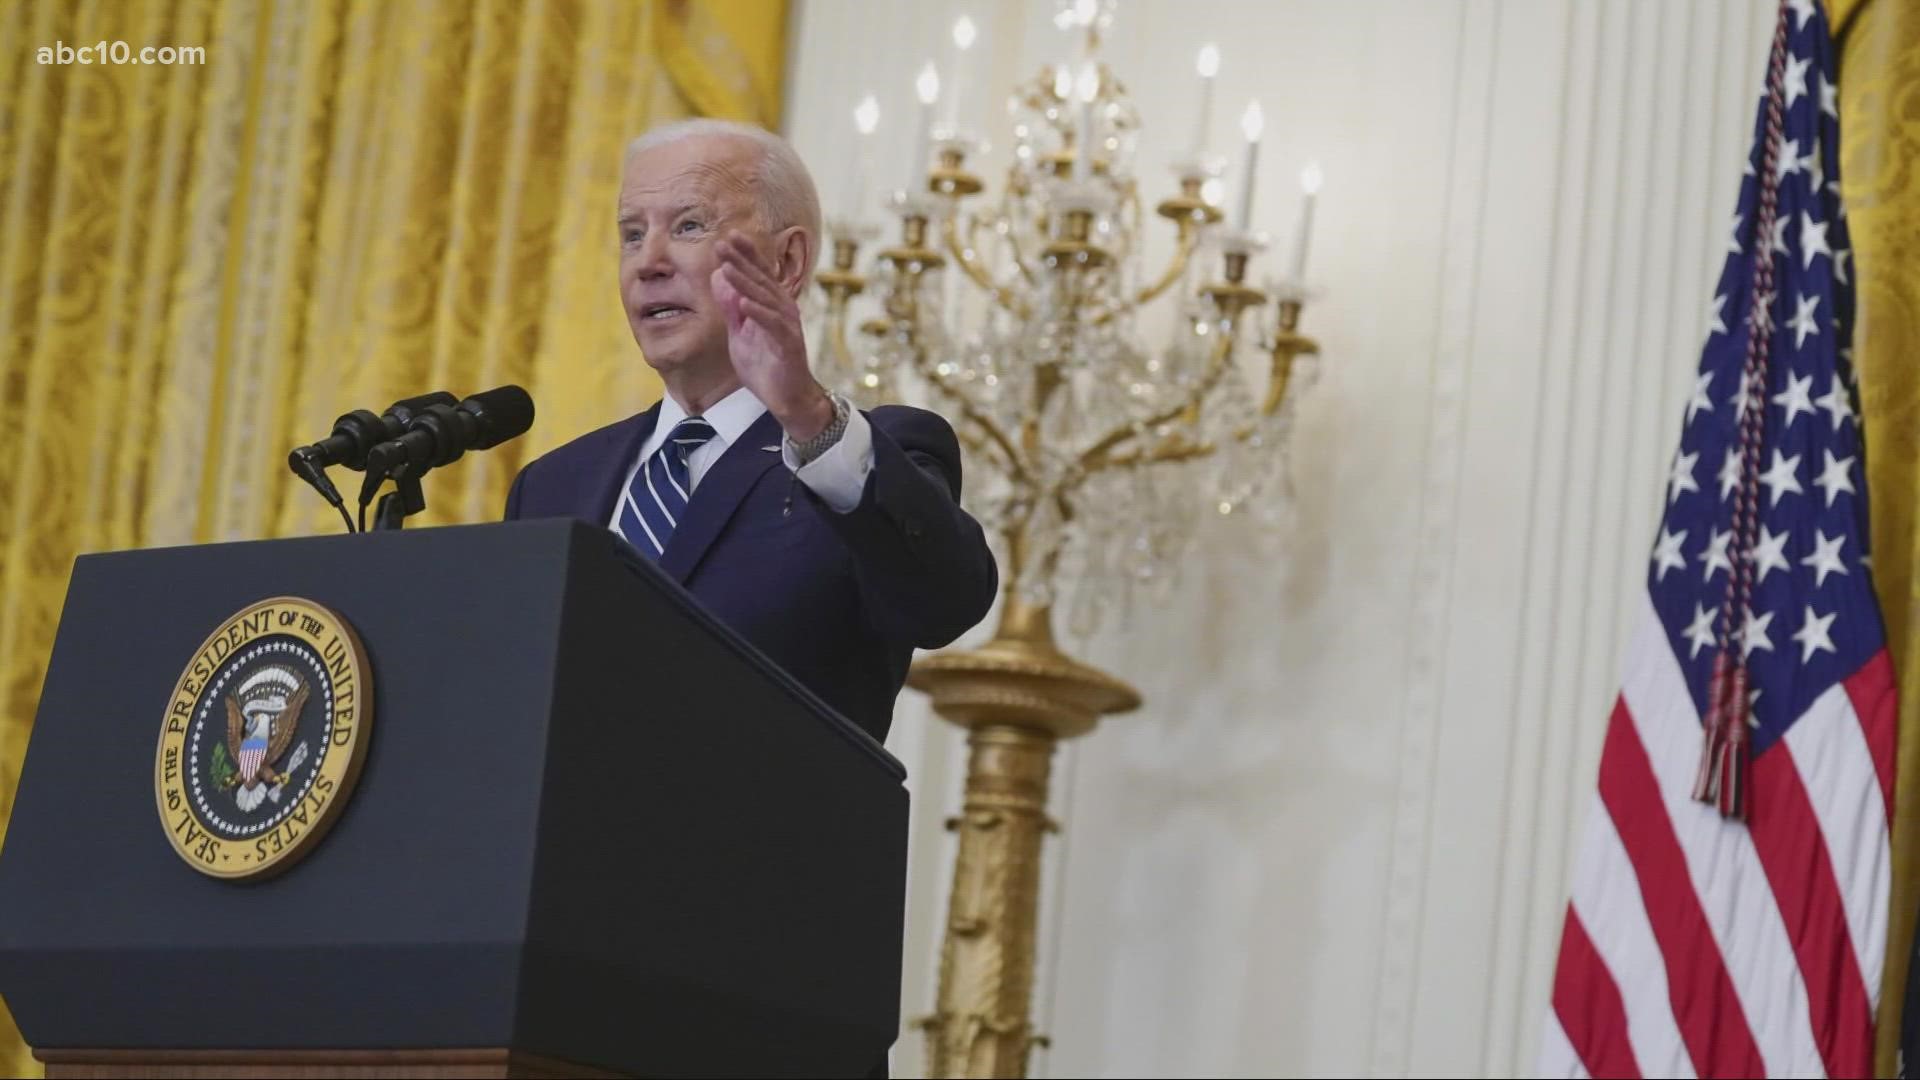 President Joe Biden will campaign with Gov. Newsom on Monday, the day before California's recall election.